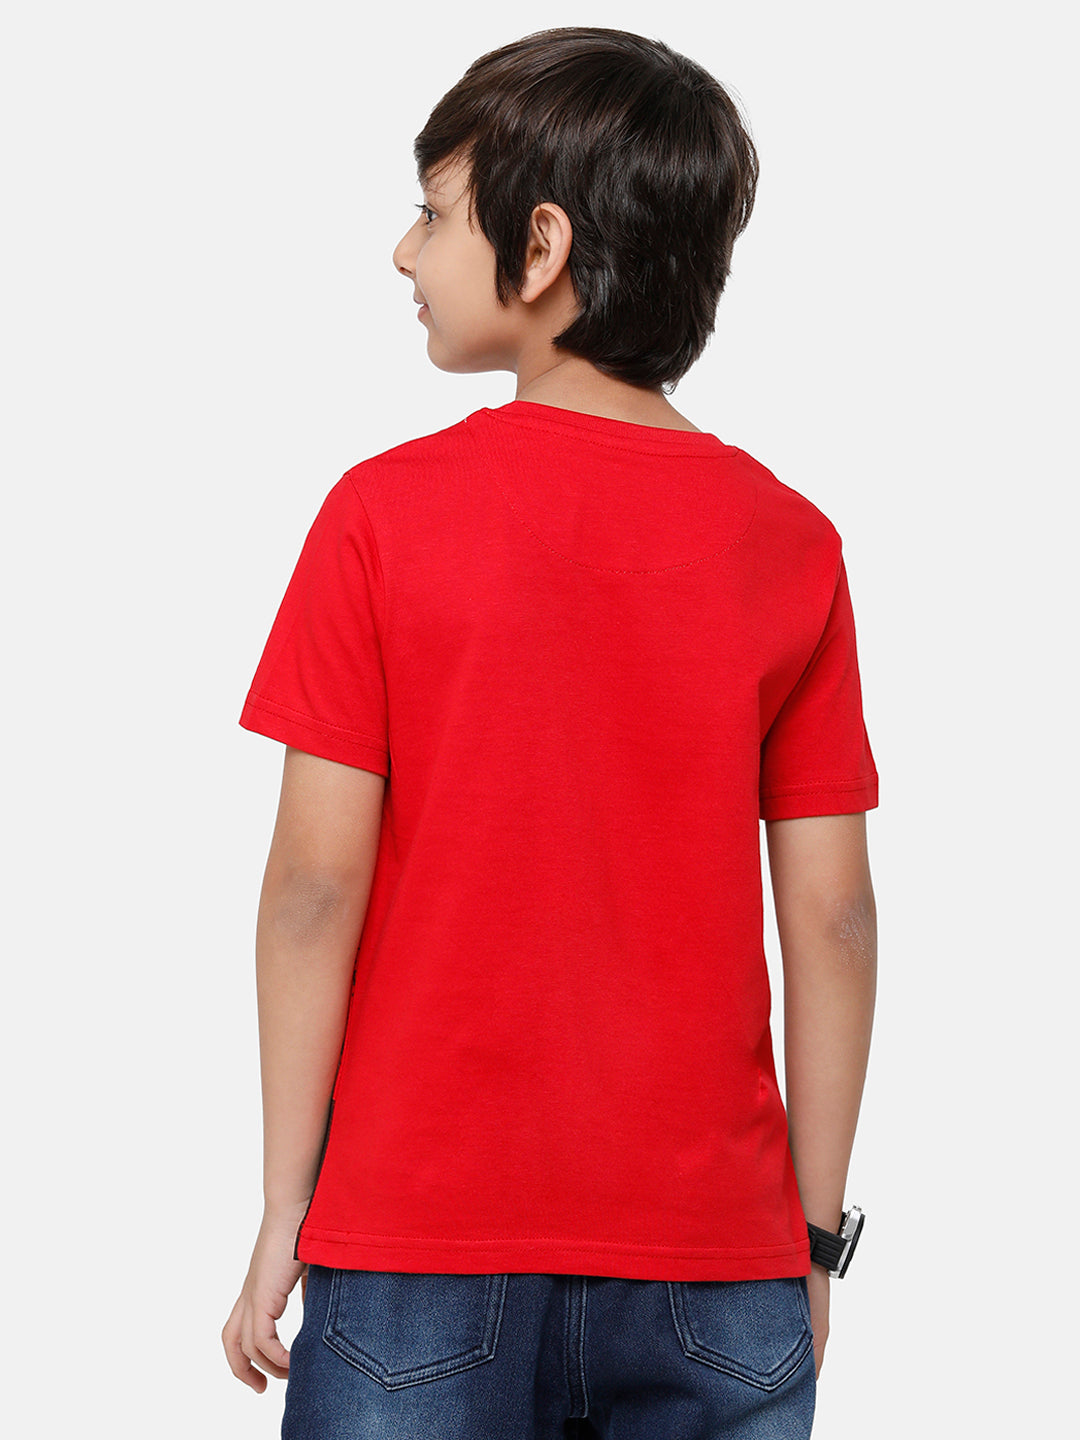 CP Boys Red Printed Slim Fit Round Neck T-Shirt T-shirt Classic Polo 